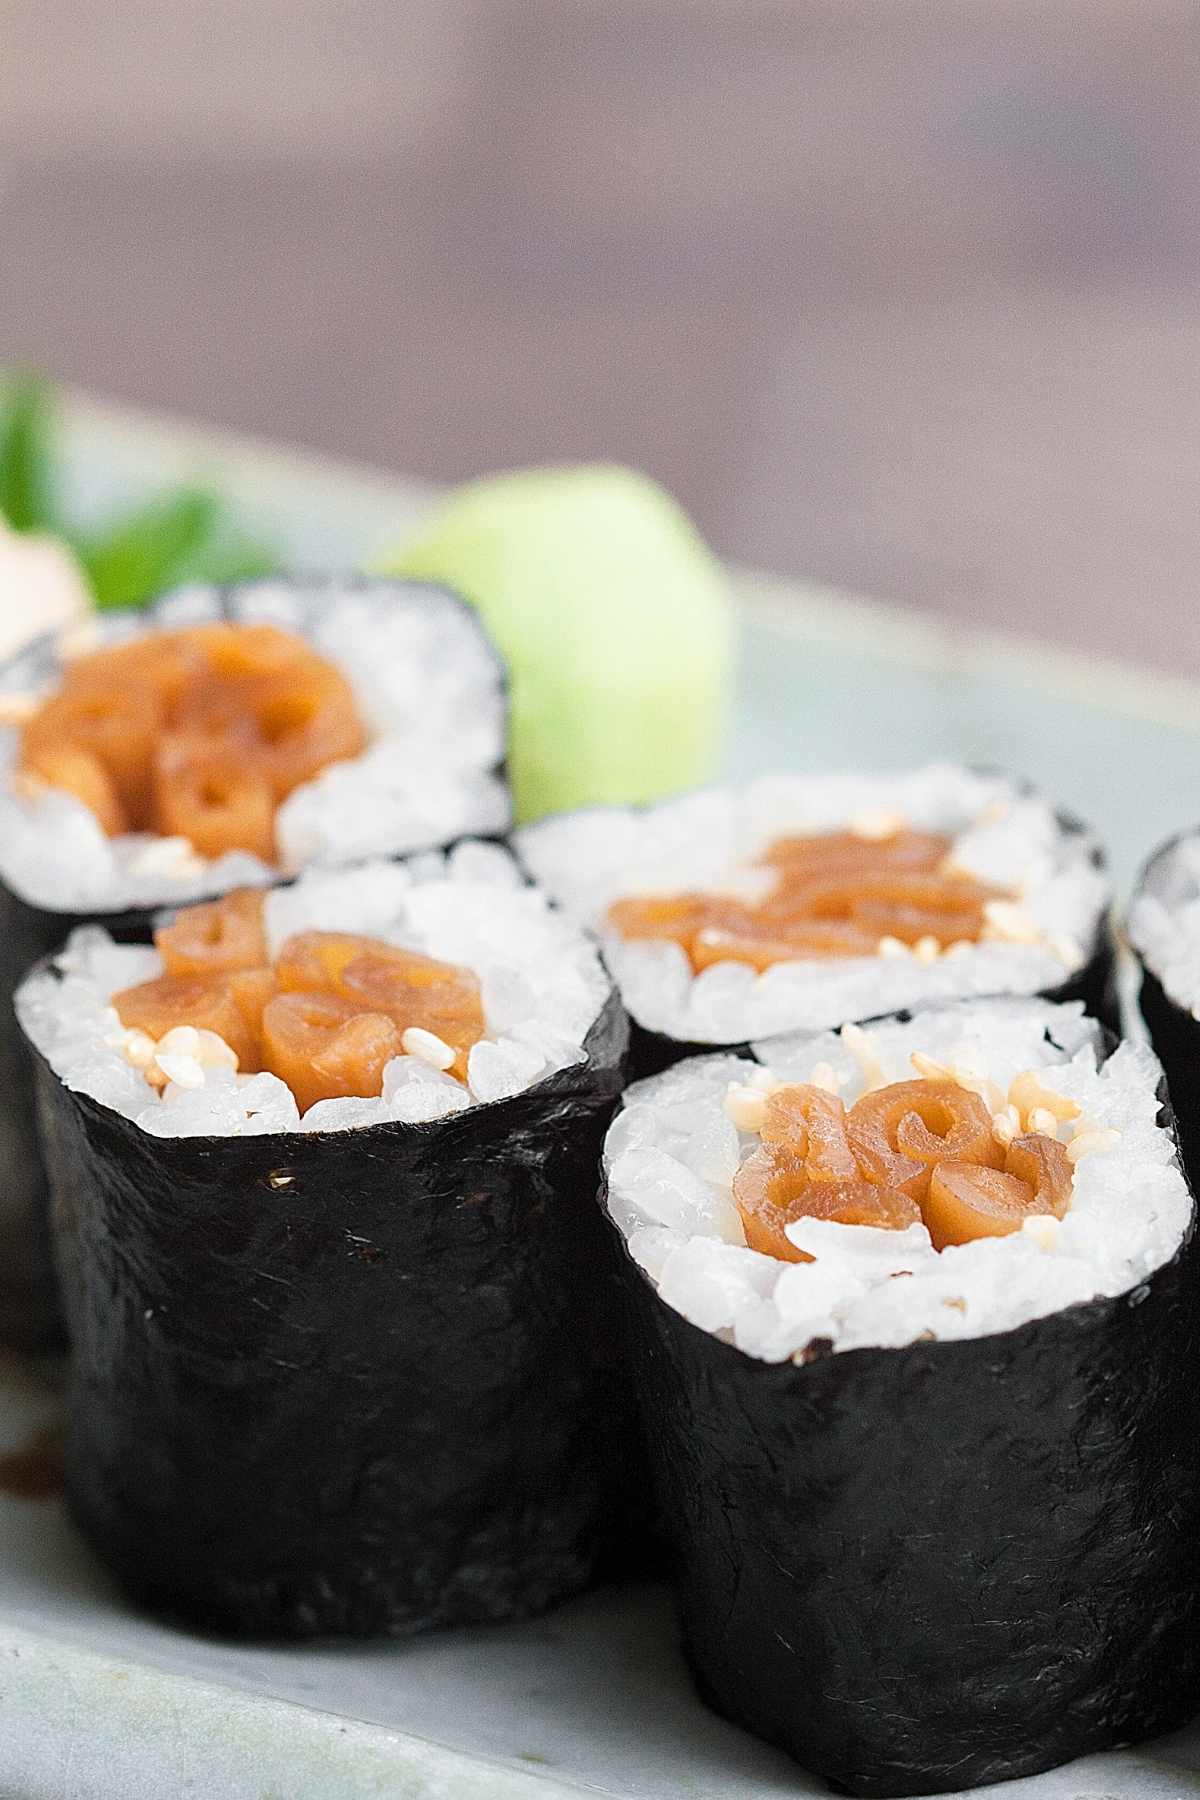 If you’re a fan of sushi, you may be familiar with Kampyo. It’s an ingredient that’s often found in sushi, but depending on where you live, can be a challenge to source.